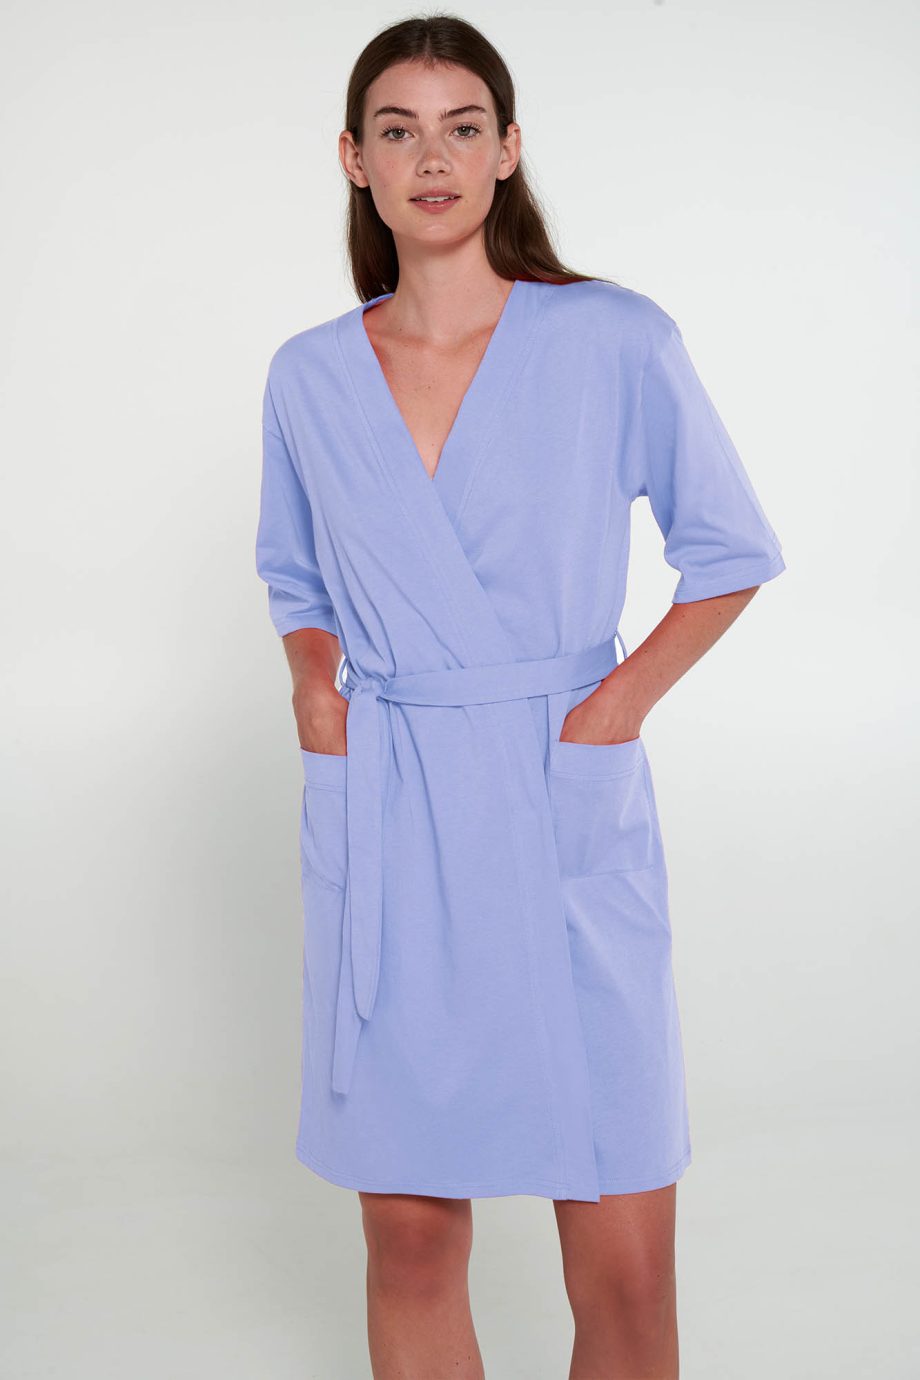 Robe with Short Sleeve